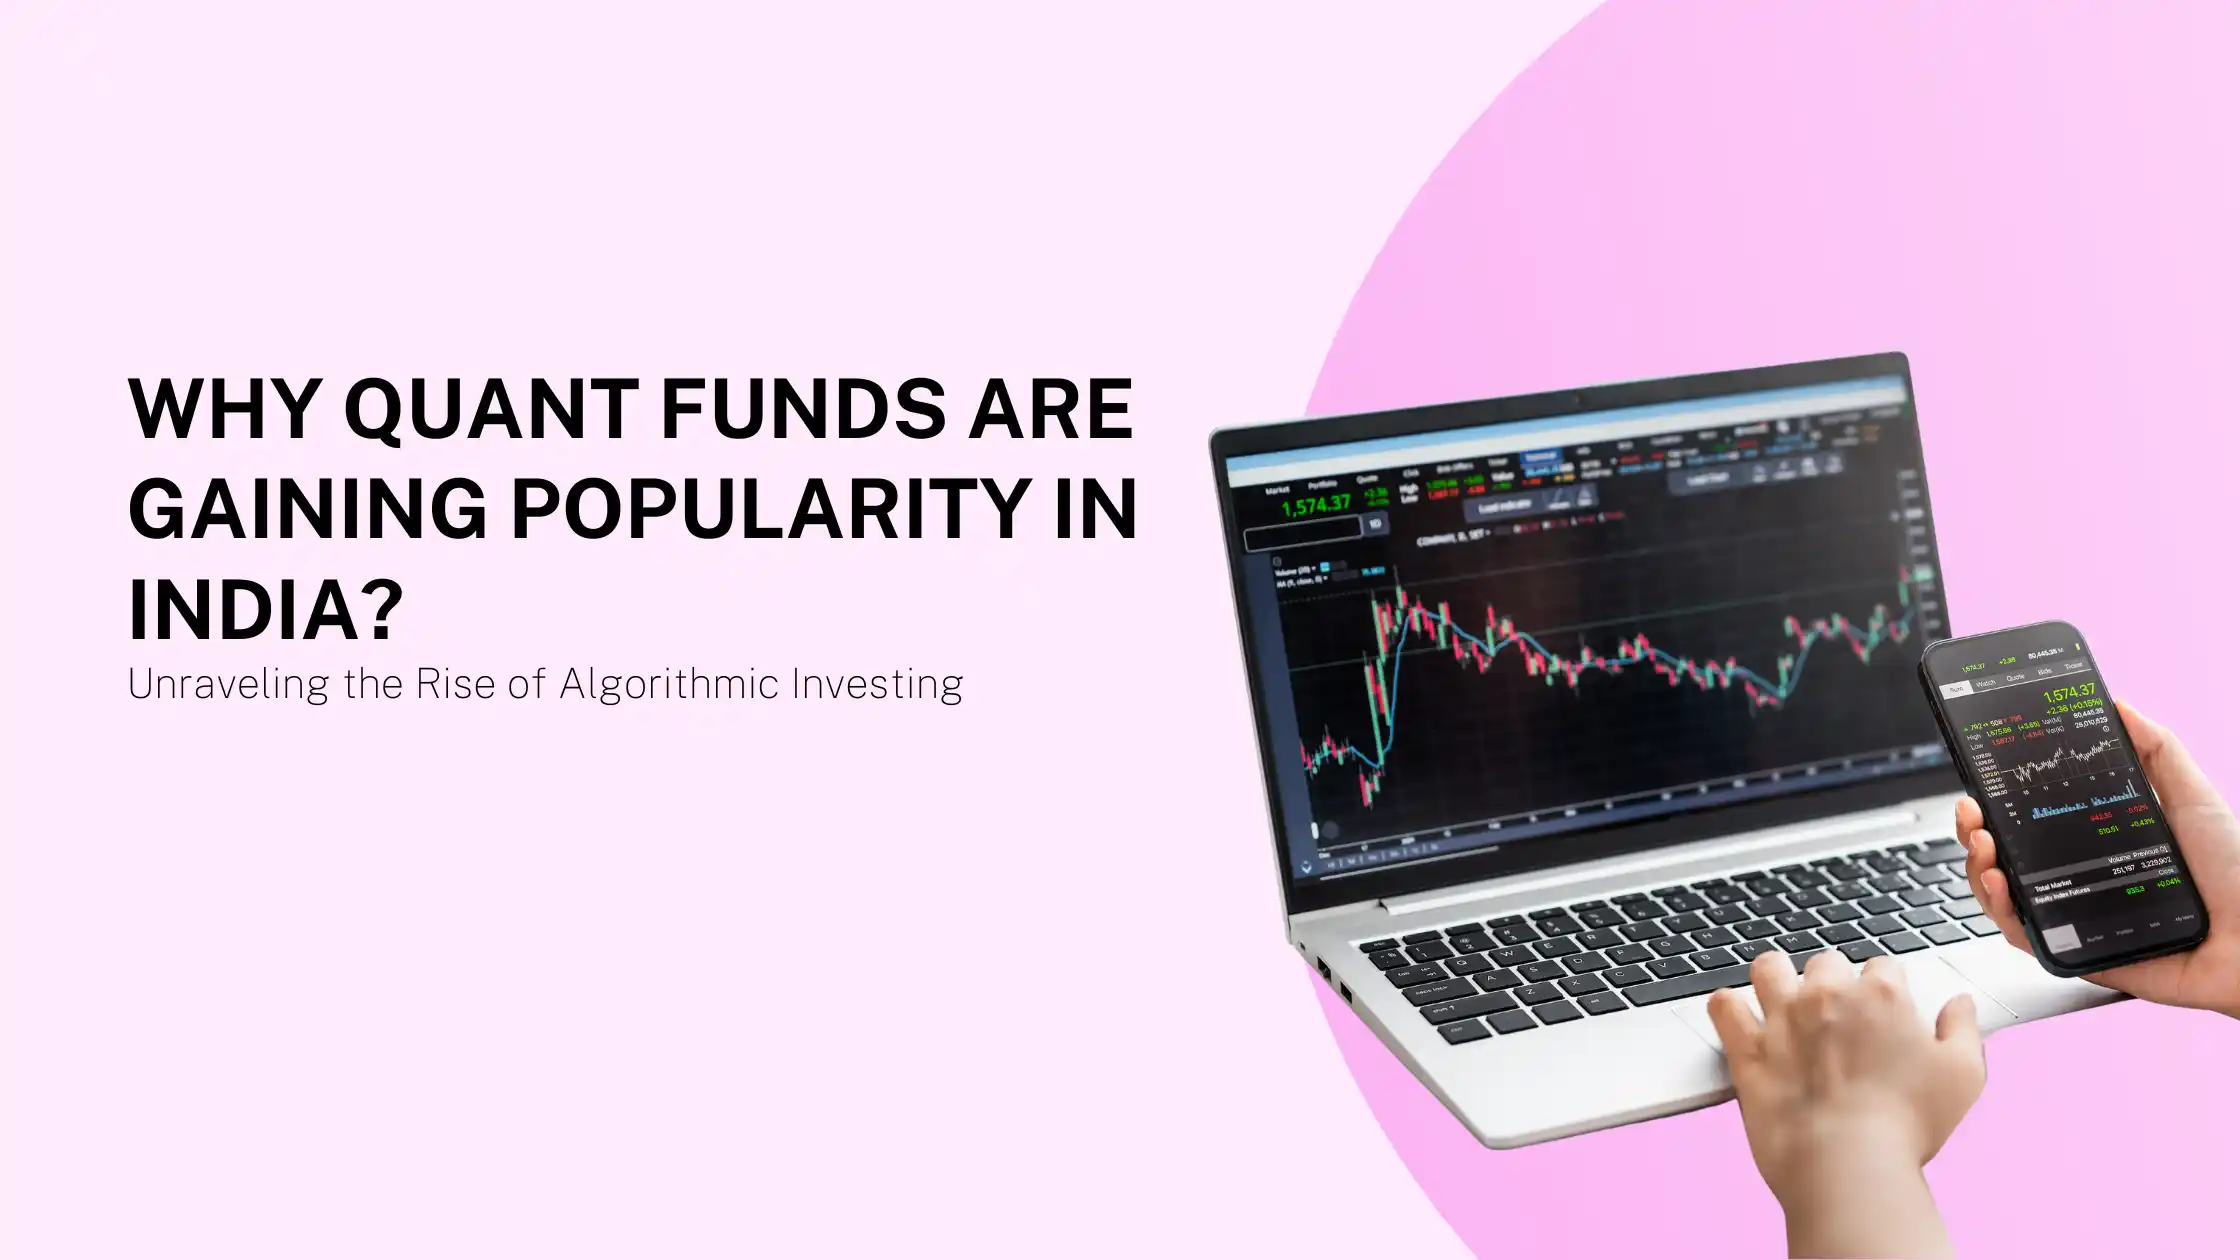 Why Quant Funds are Gaining Popularity in India: Unraveling the Rise of Algorithmic Investing